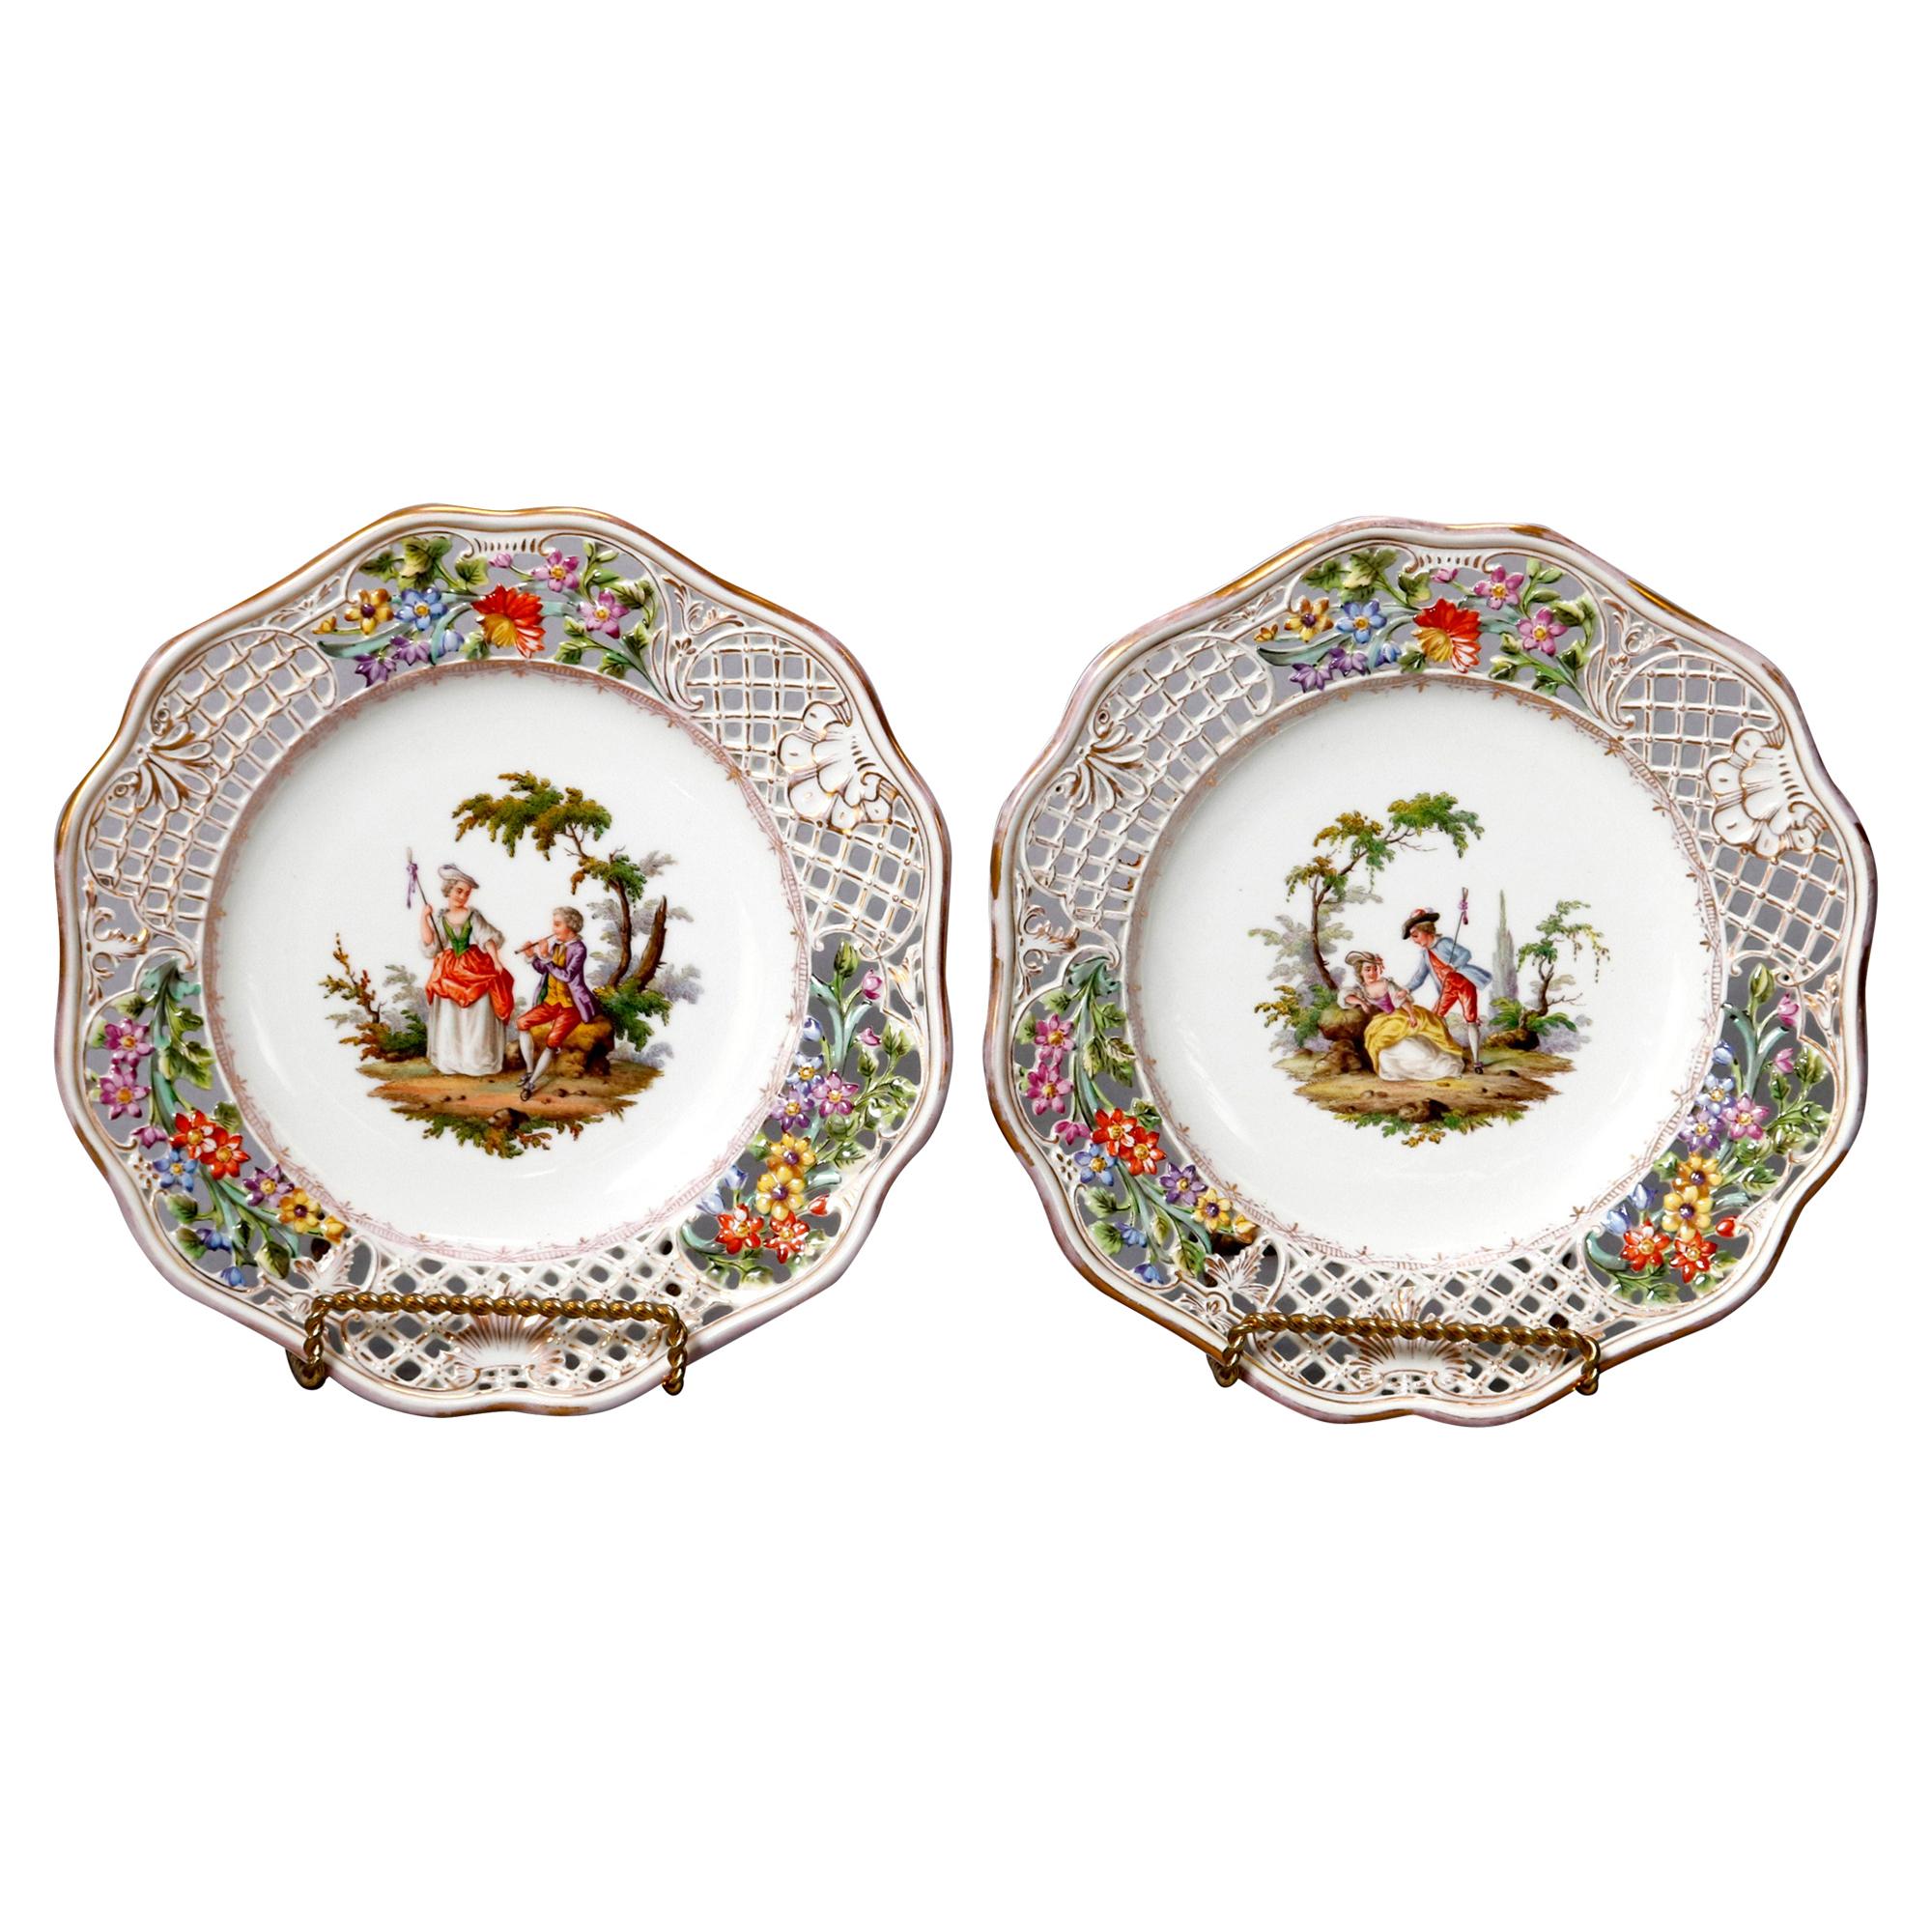 Antique Pair of German Meissen Pictorial & Reticulated Porcelain Plates